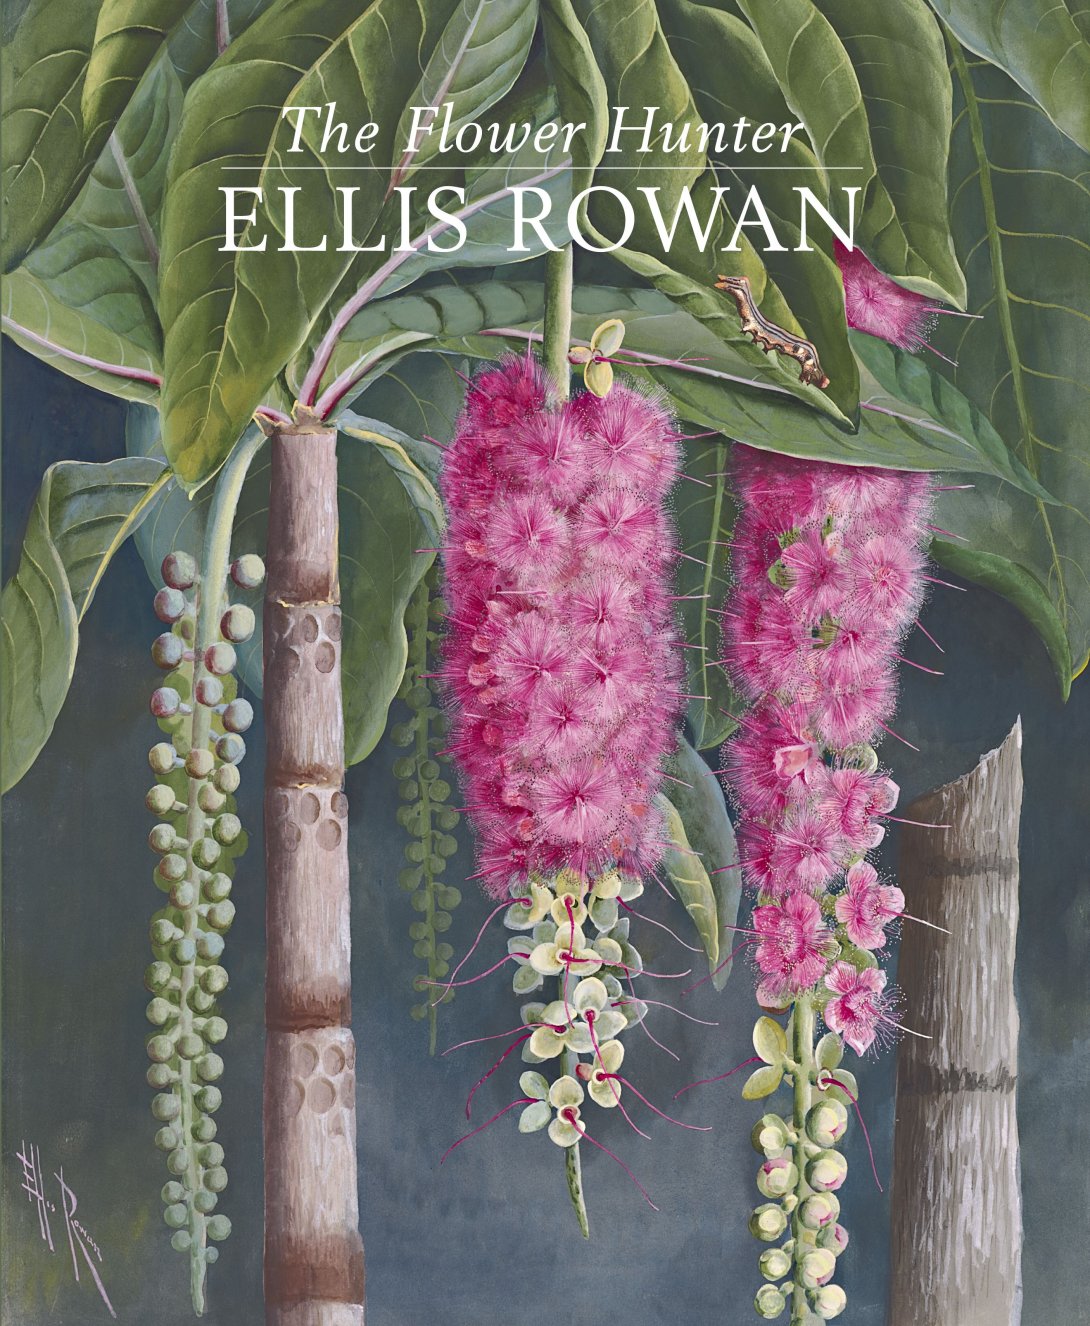 The Flower Hunter book cover. An Ellis Rowan image with large green leaves and purple flowers and greenery hanging down.